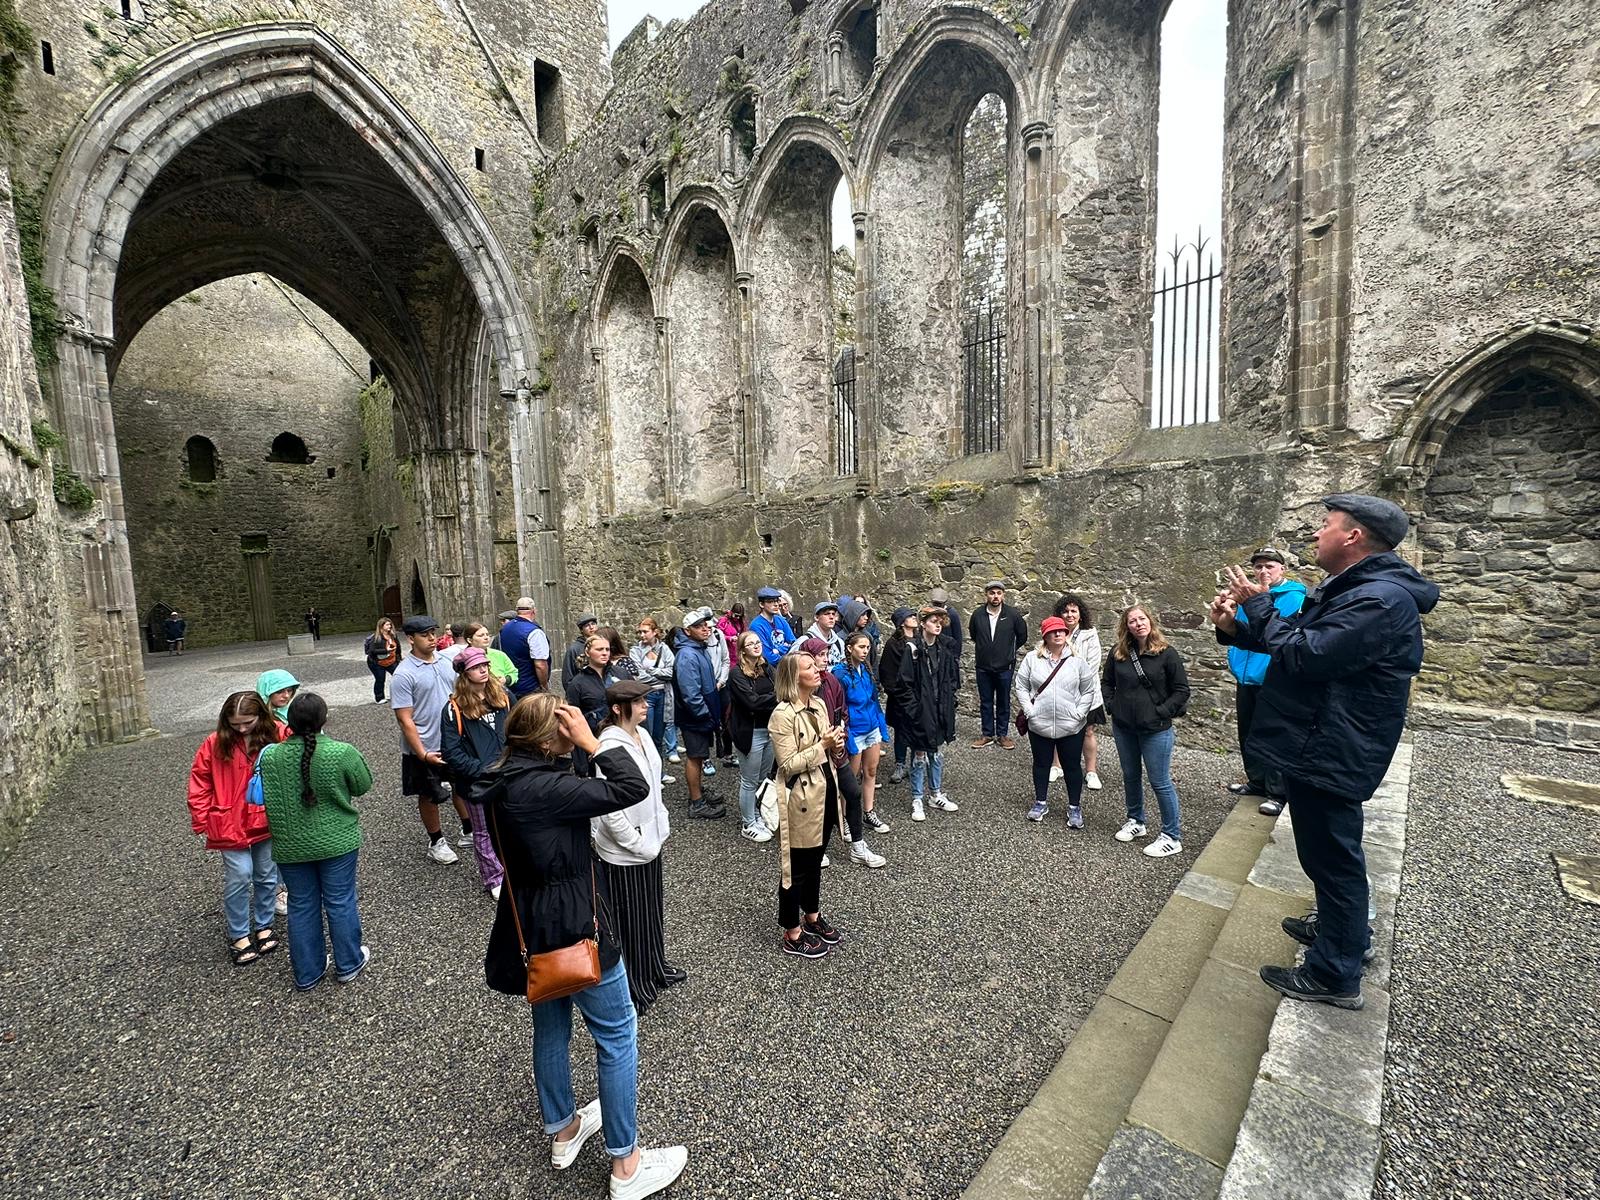 The group learns about the history of the Rock of Cashel while standing inside the historic area. Used with permission/Jacob Moore.